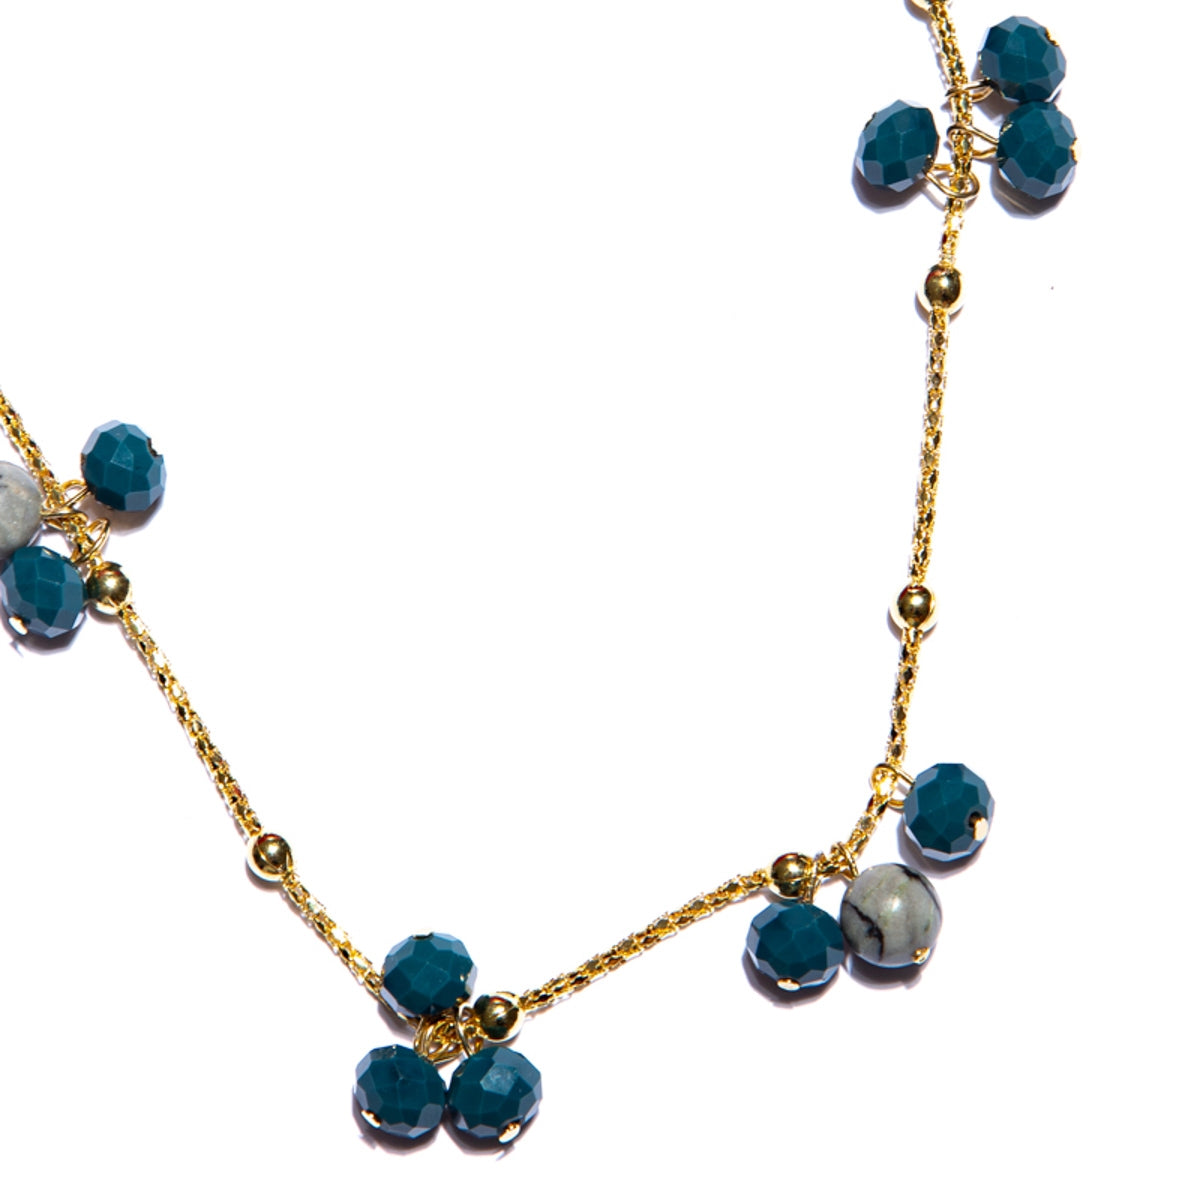 Gold-Plated Long Crystal Necklace With Jasper Black Net Beads